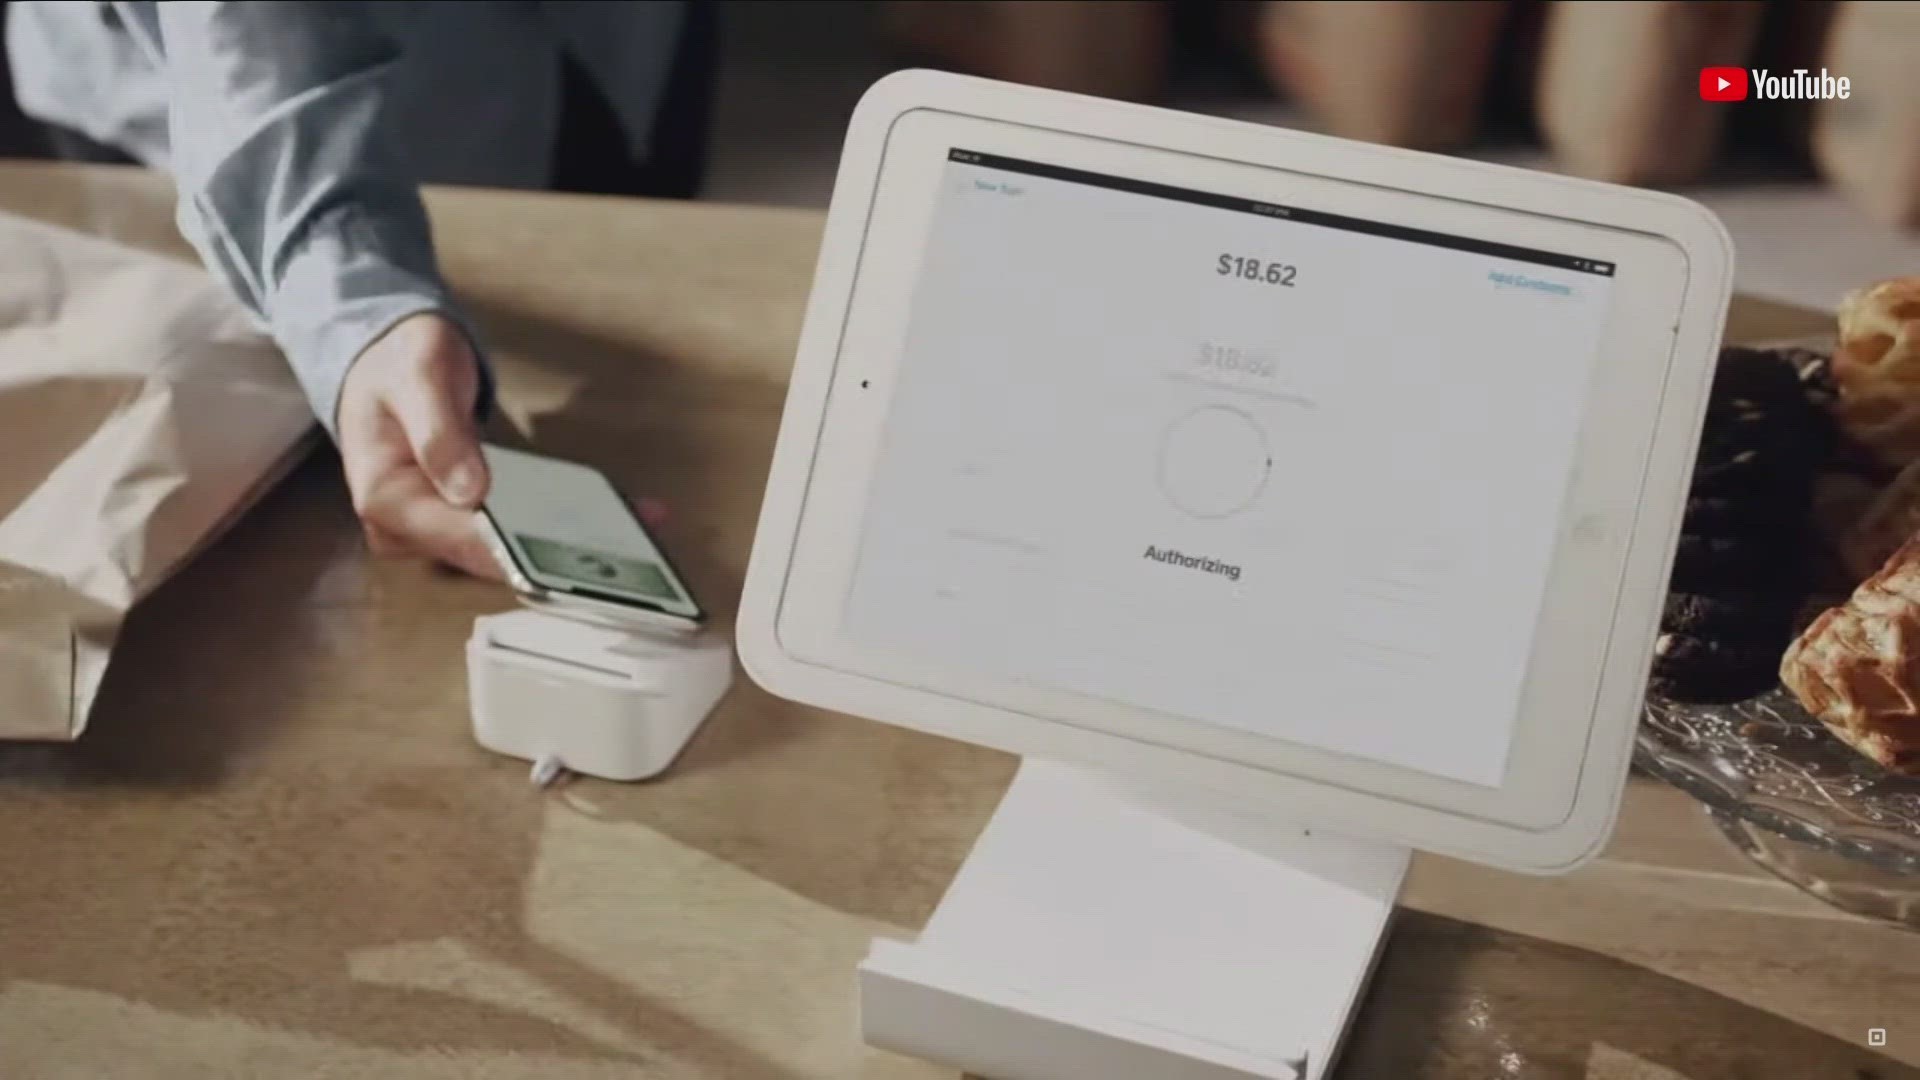 Square helps millions run their businesses with payroll, credit card processing, and more.